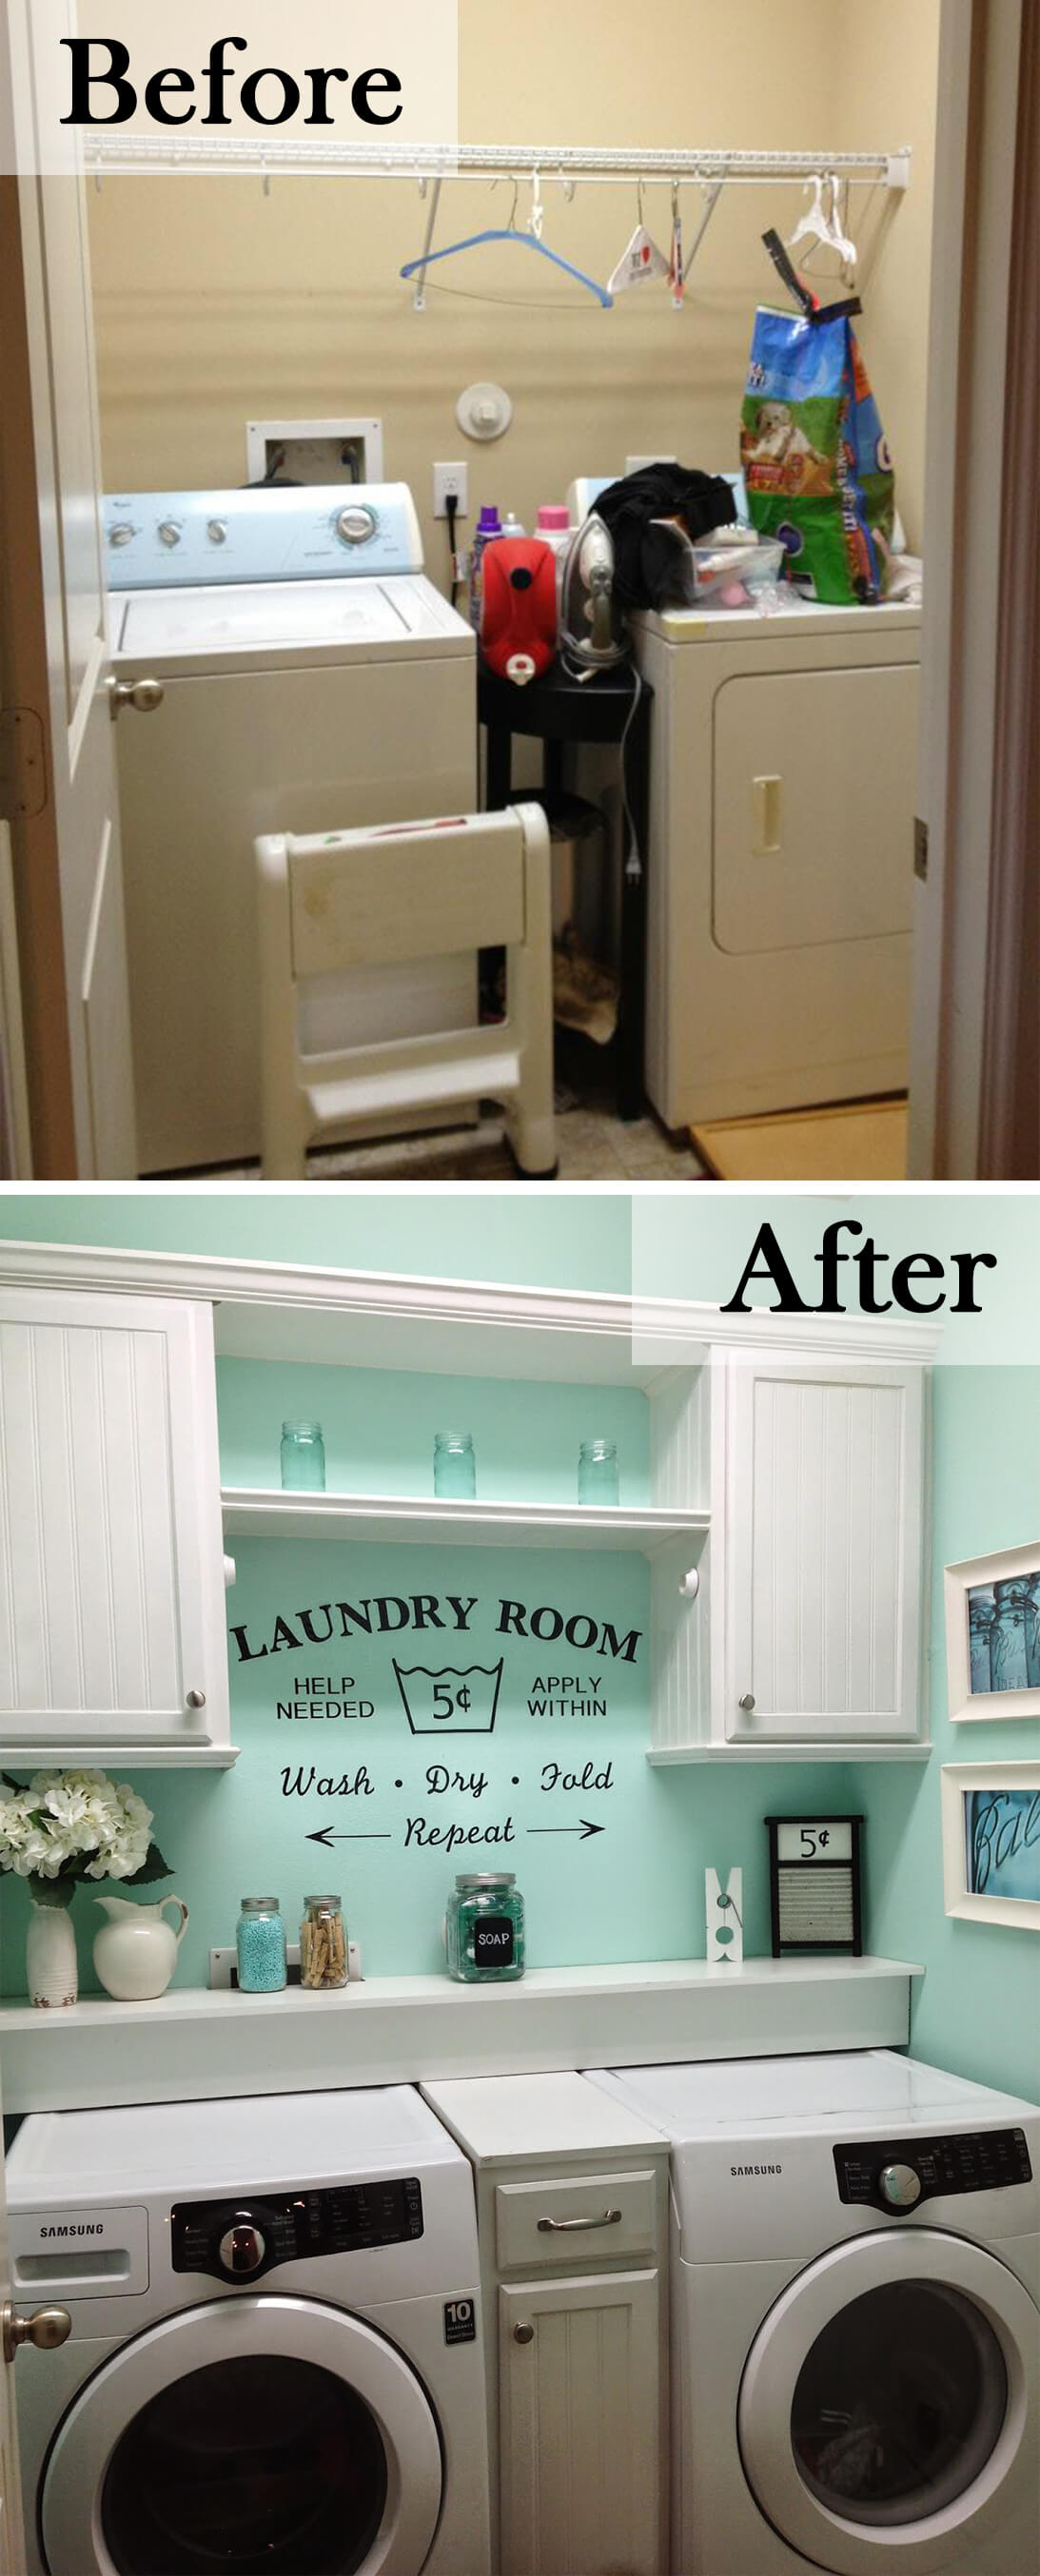 18 Best Budget Friendly Laundry Room Makeover Ideas and Designs ...